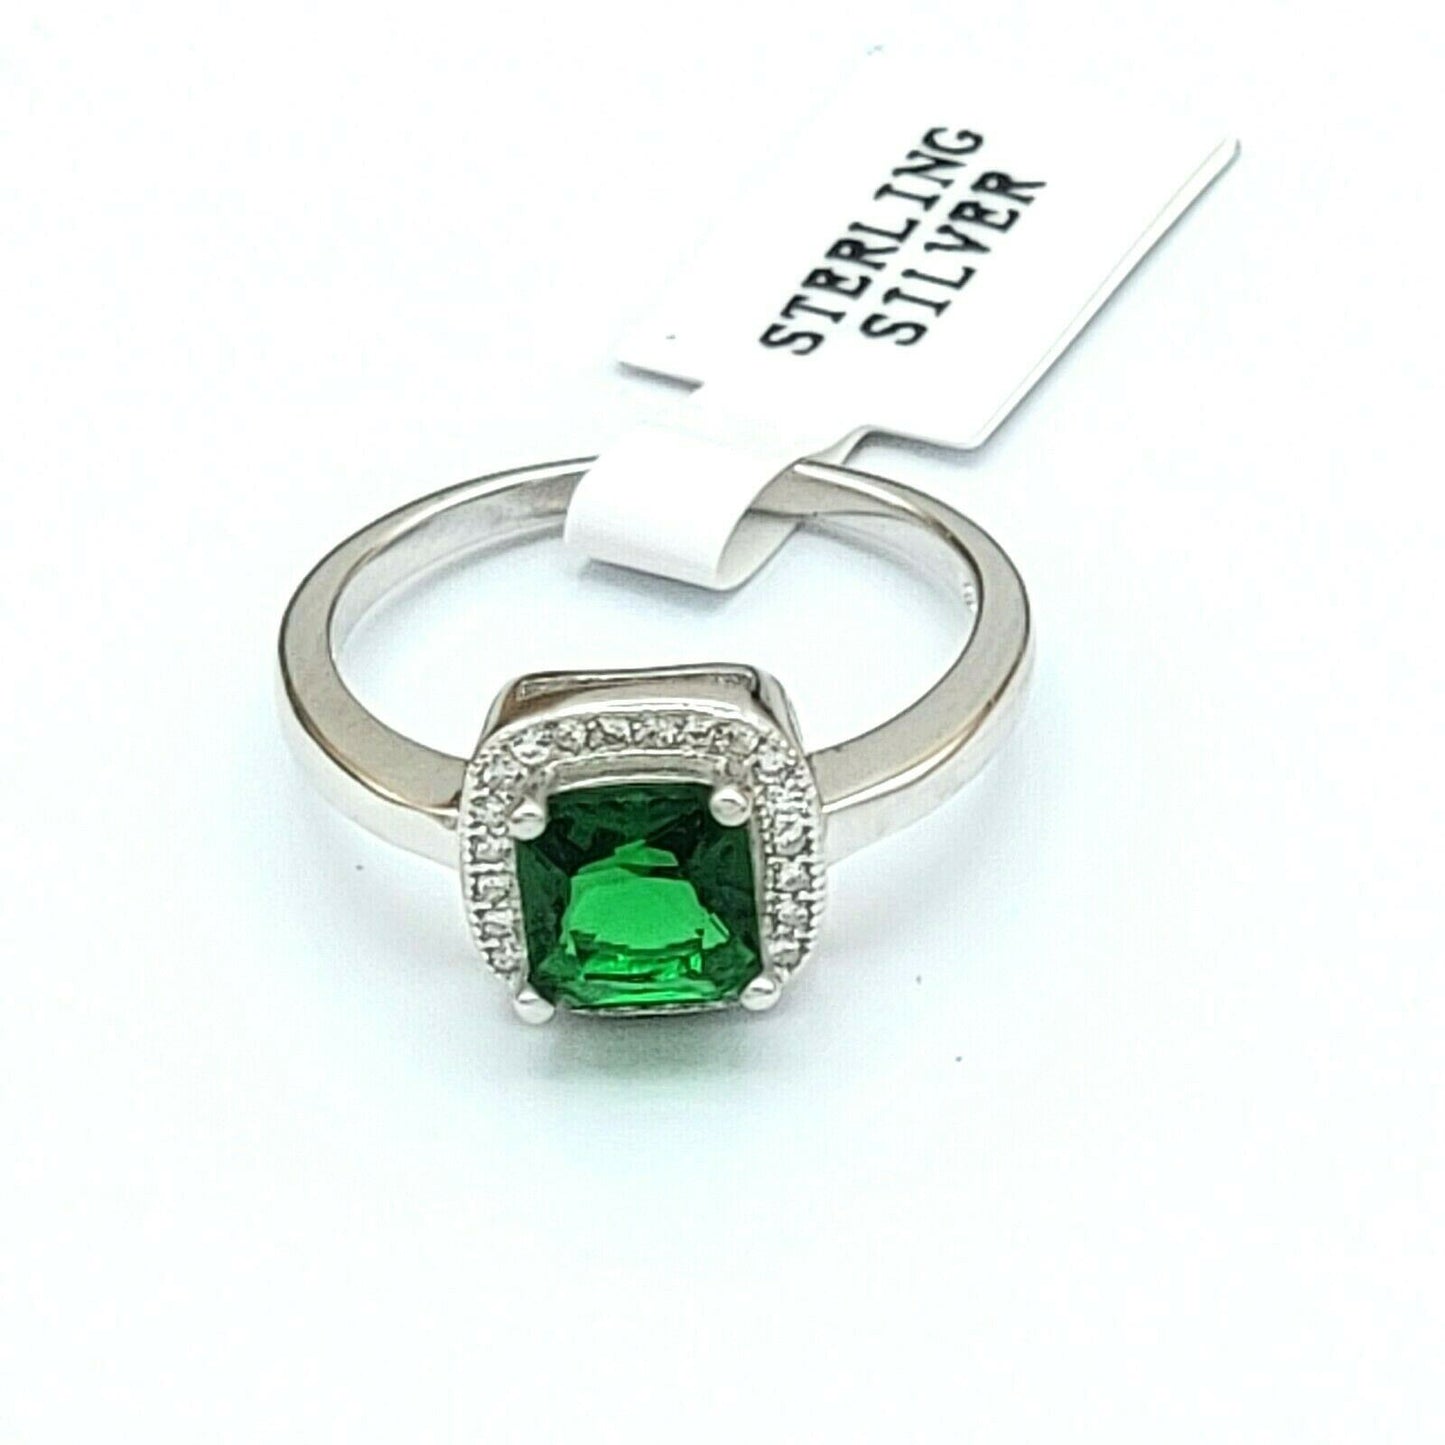 Solid 925 Sterling Silver. Princess Cut Green Cubic Zirconia Ring